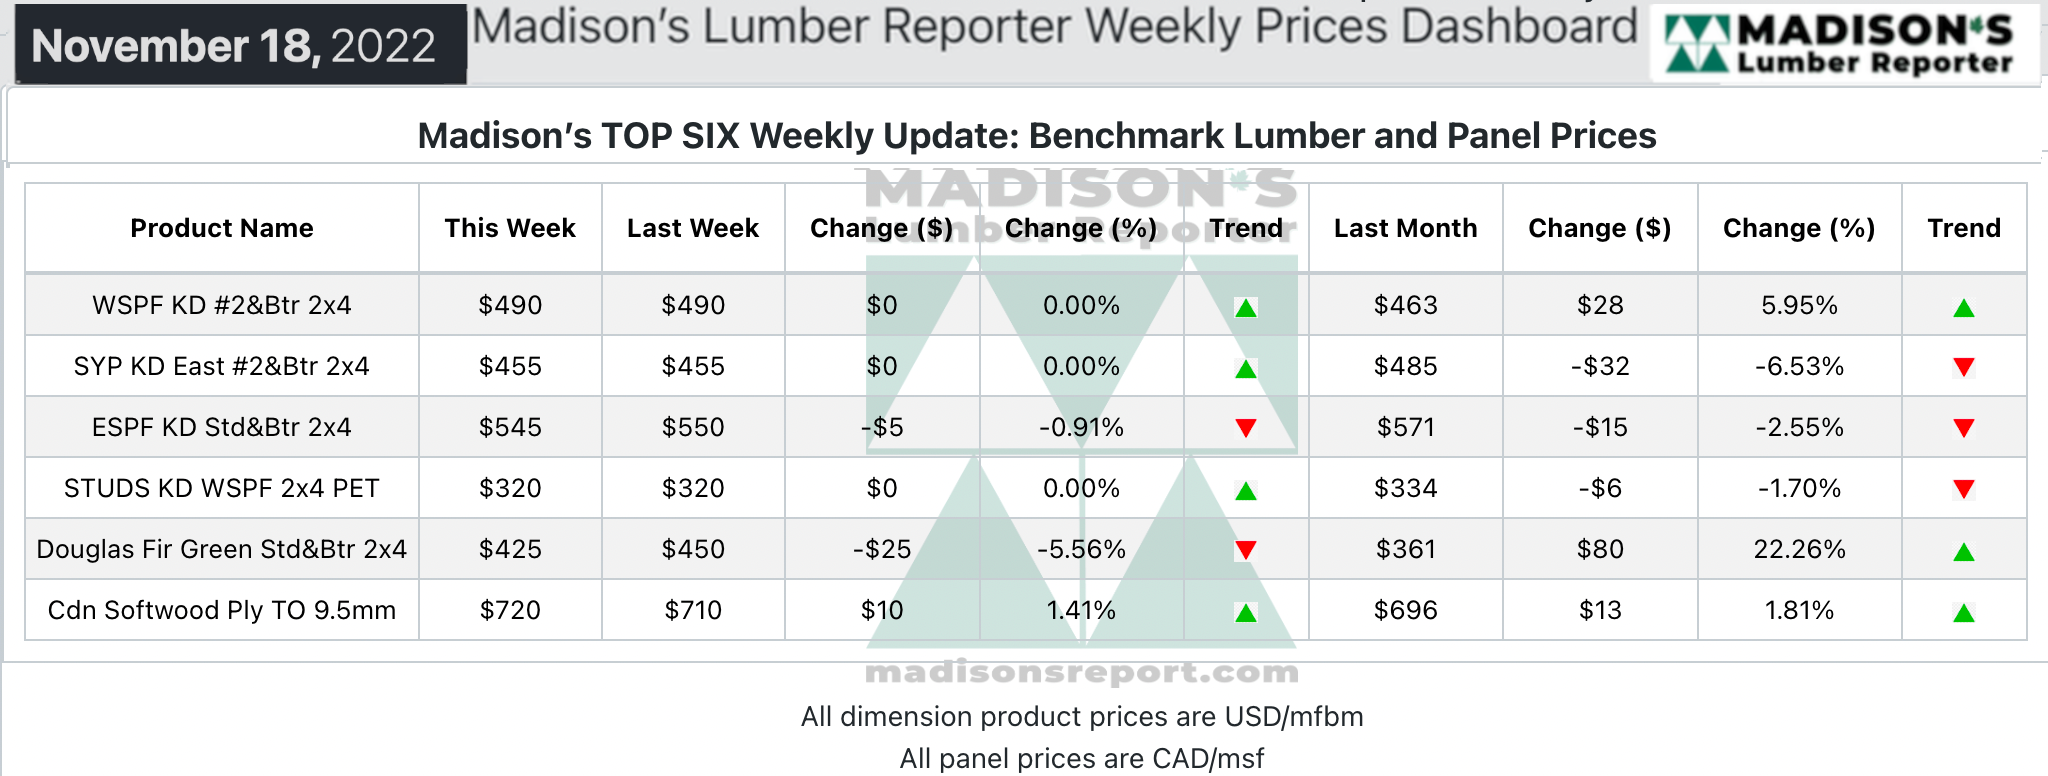 Madison's Lumber Reporter Weekly Prices Dashboard - November 18, 2022 - Madison's TOP SIX Weekly Update: Benchmark Lumber and Panel Prices